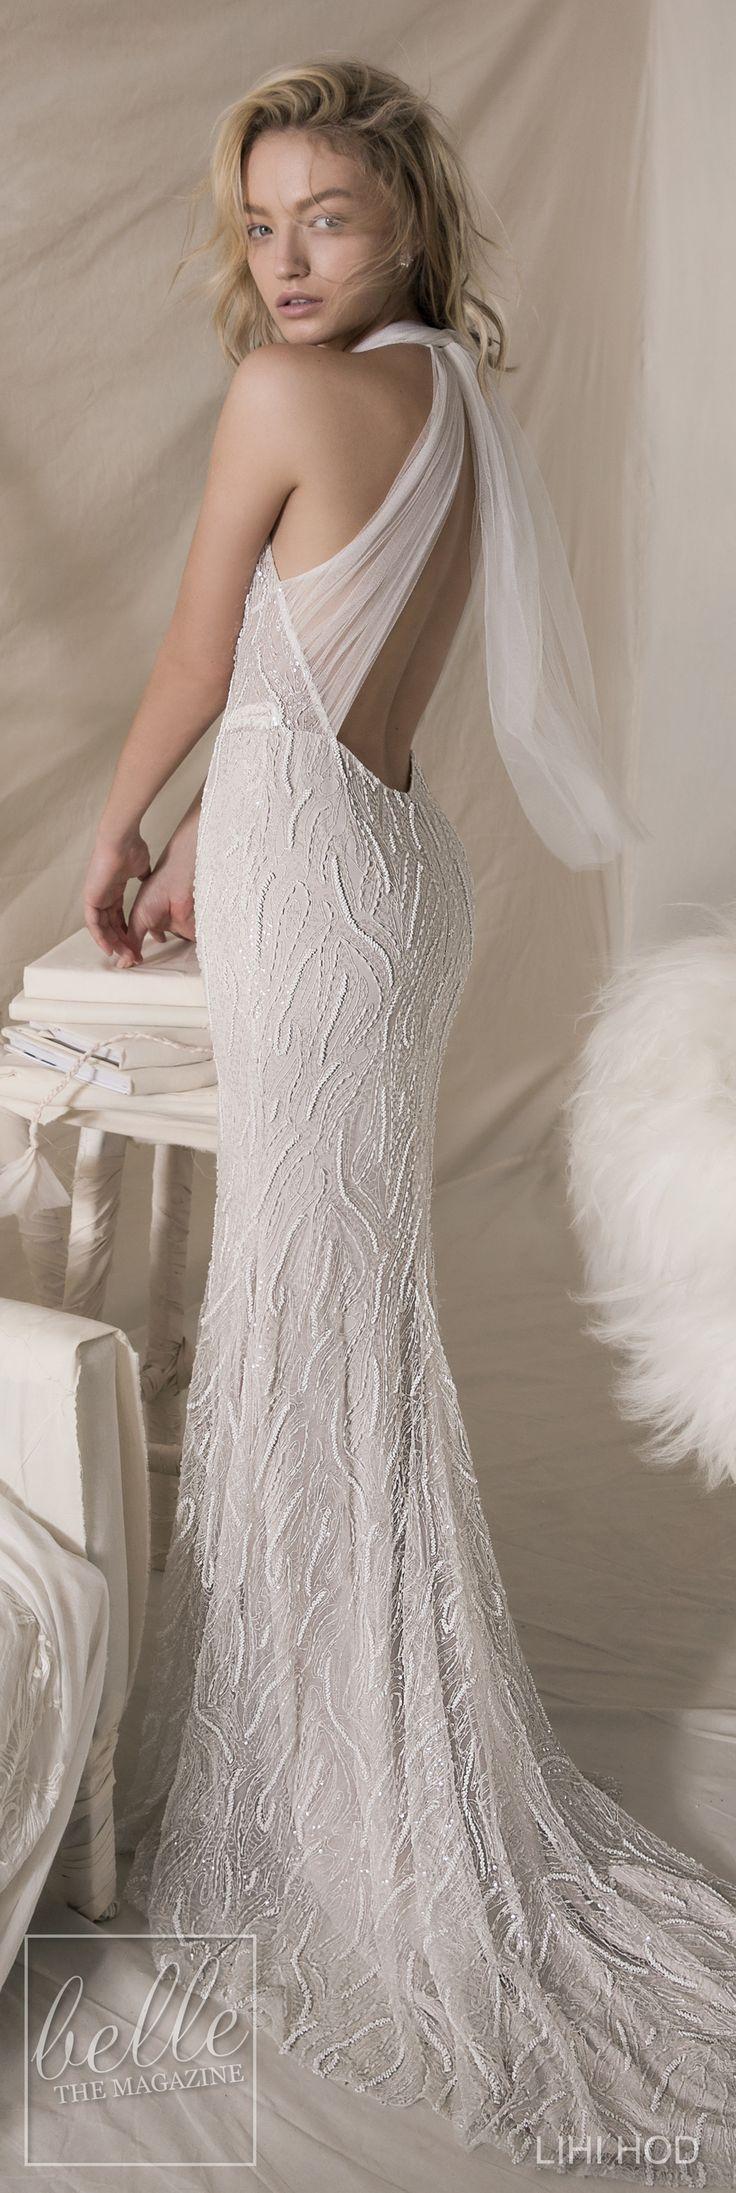 Wedding - Wedding Dresses By Lihi Hod Fall 2018 Couture Bridal Collection